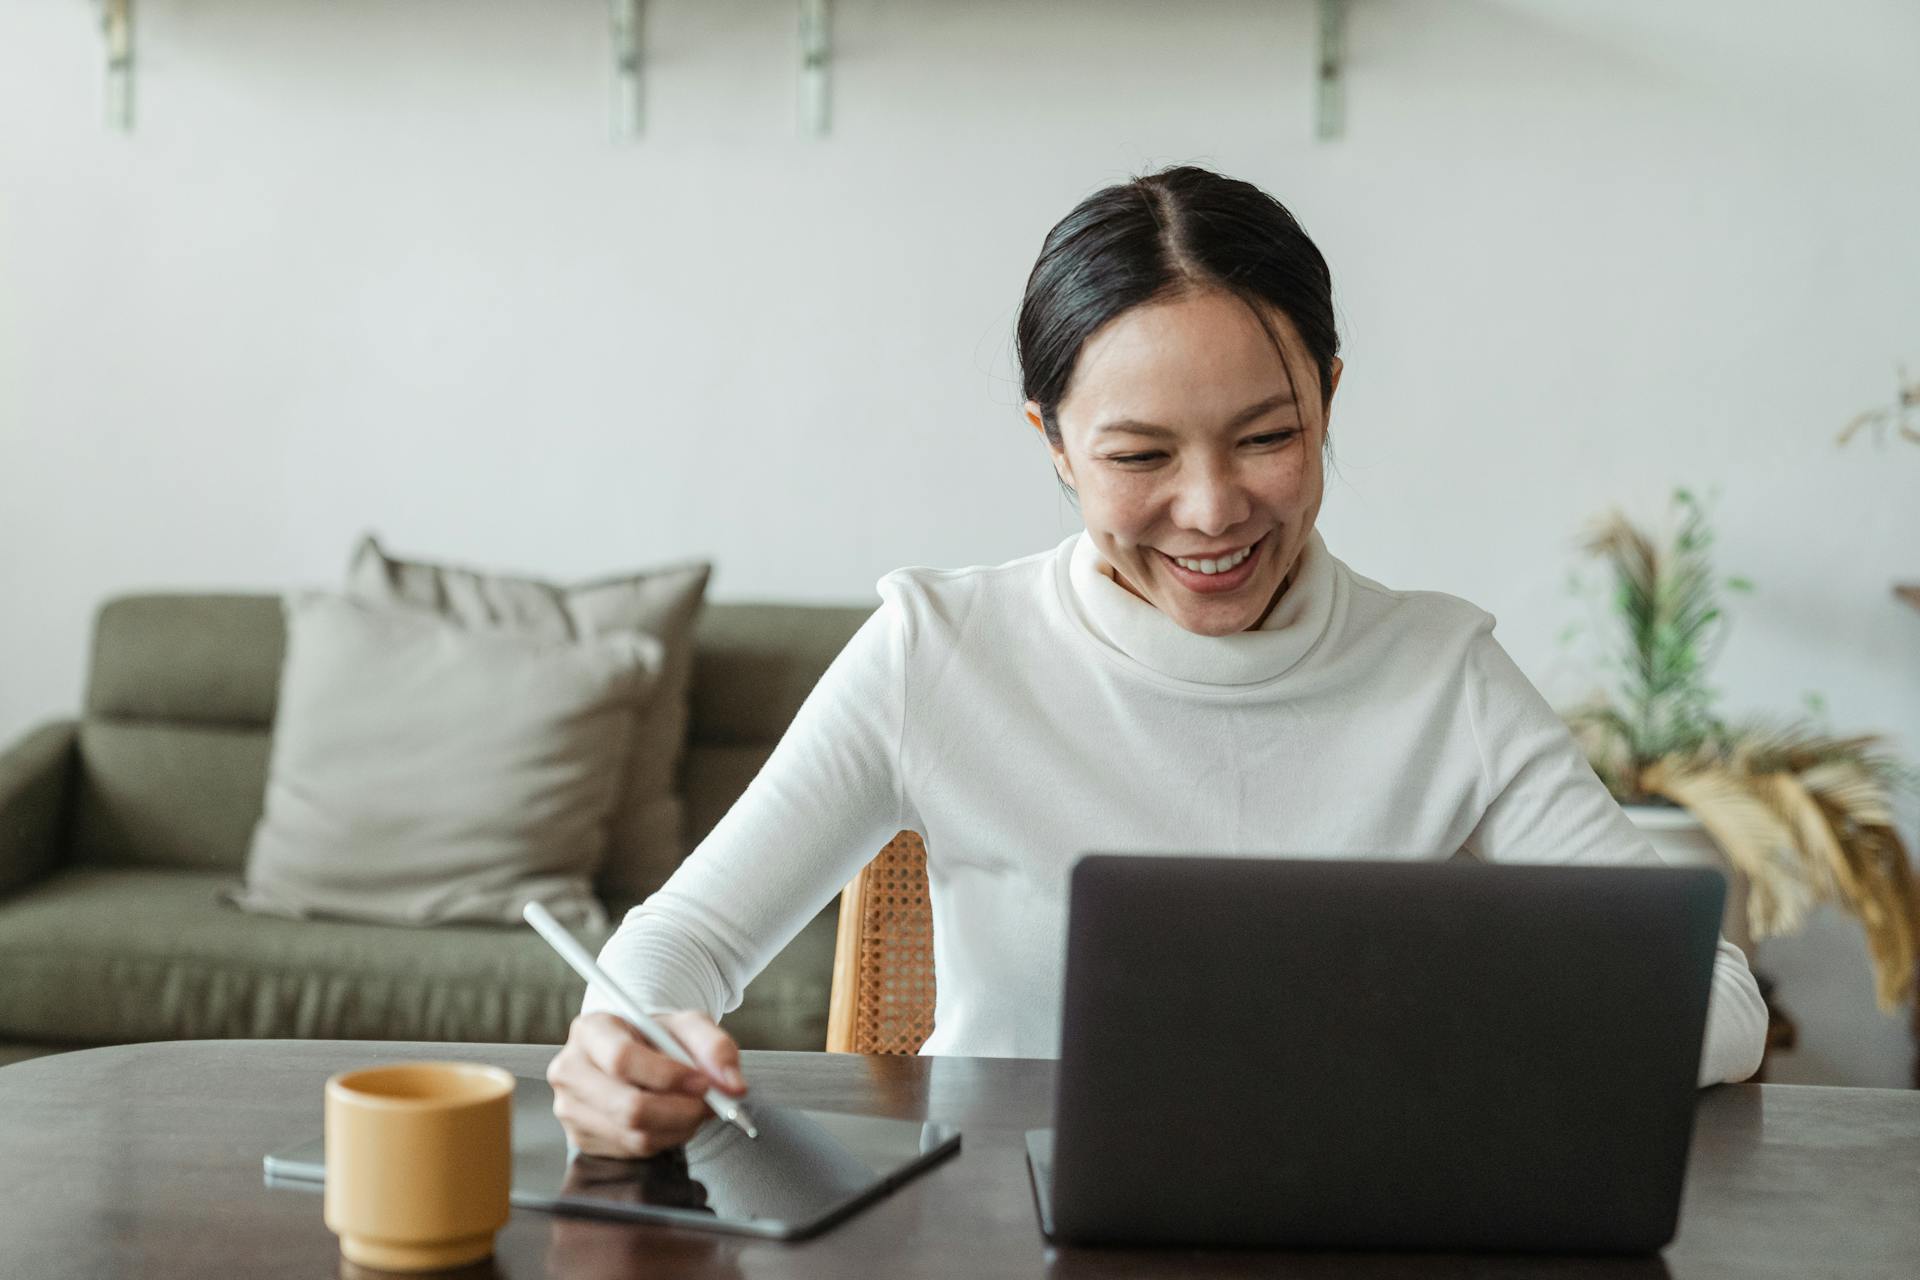 A happy woman working | Source: Pexels